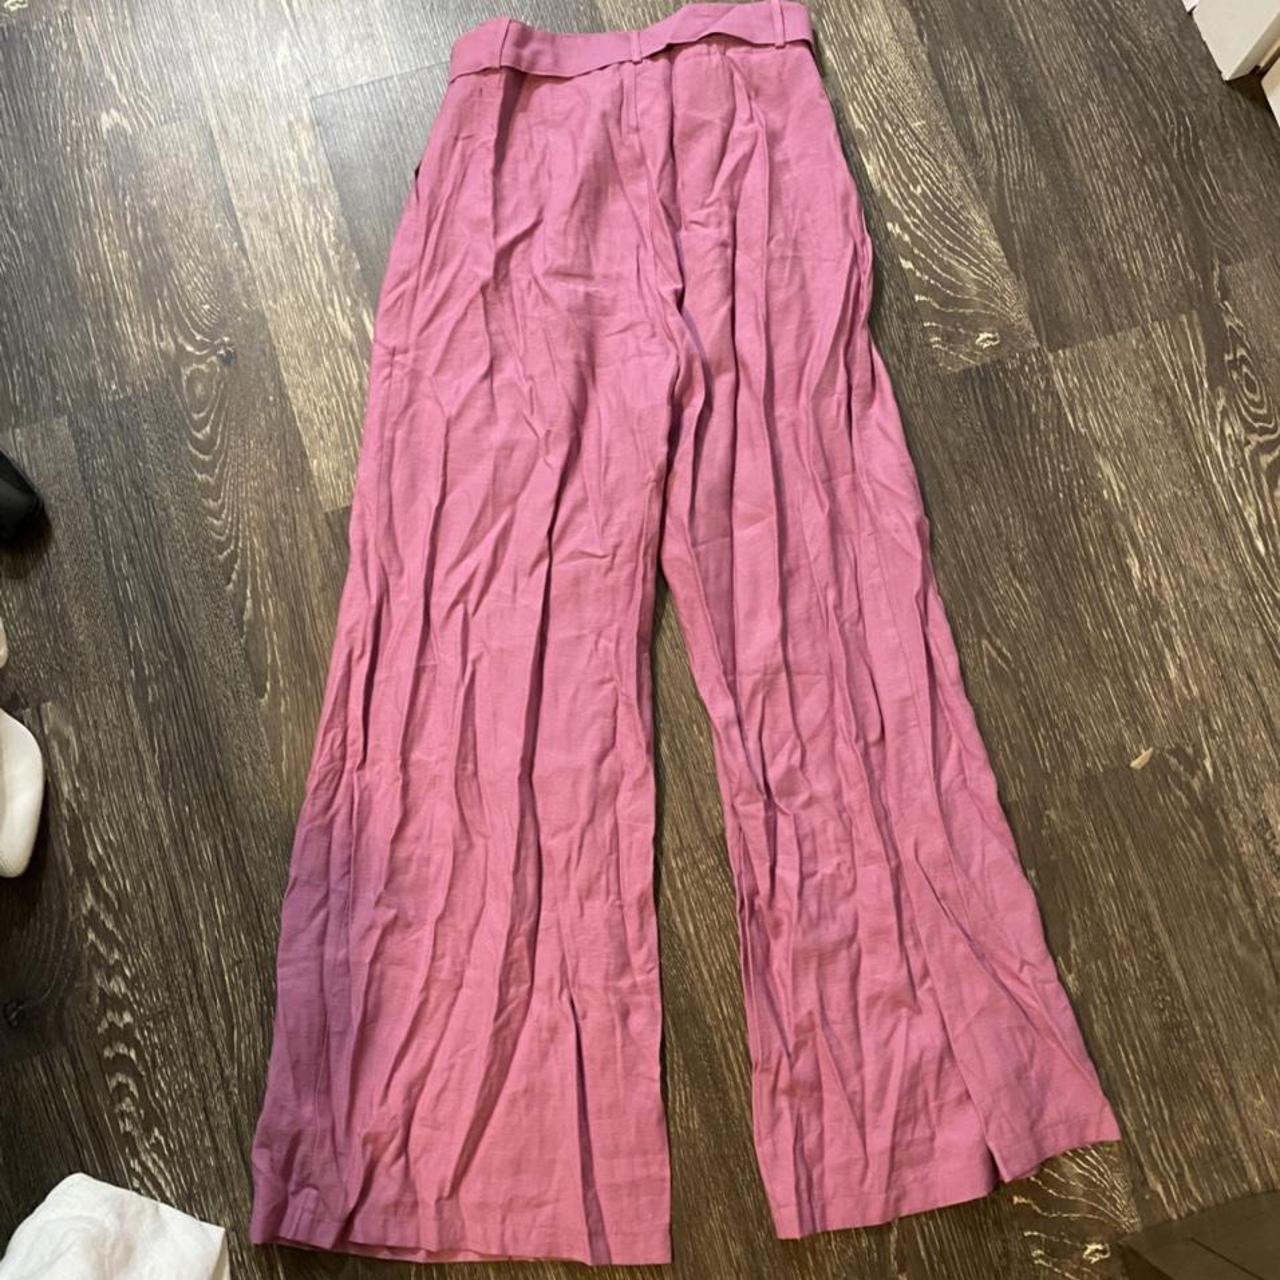 Product Image 3 - Nasty gal washed purple pants
Never